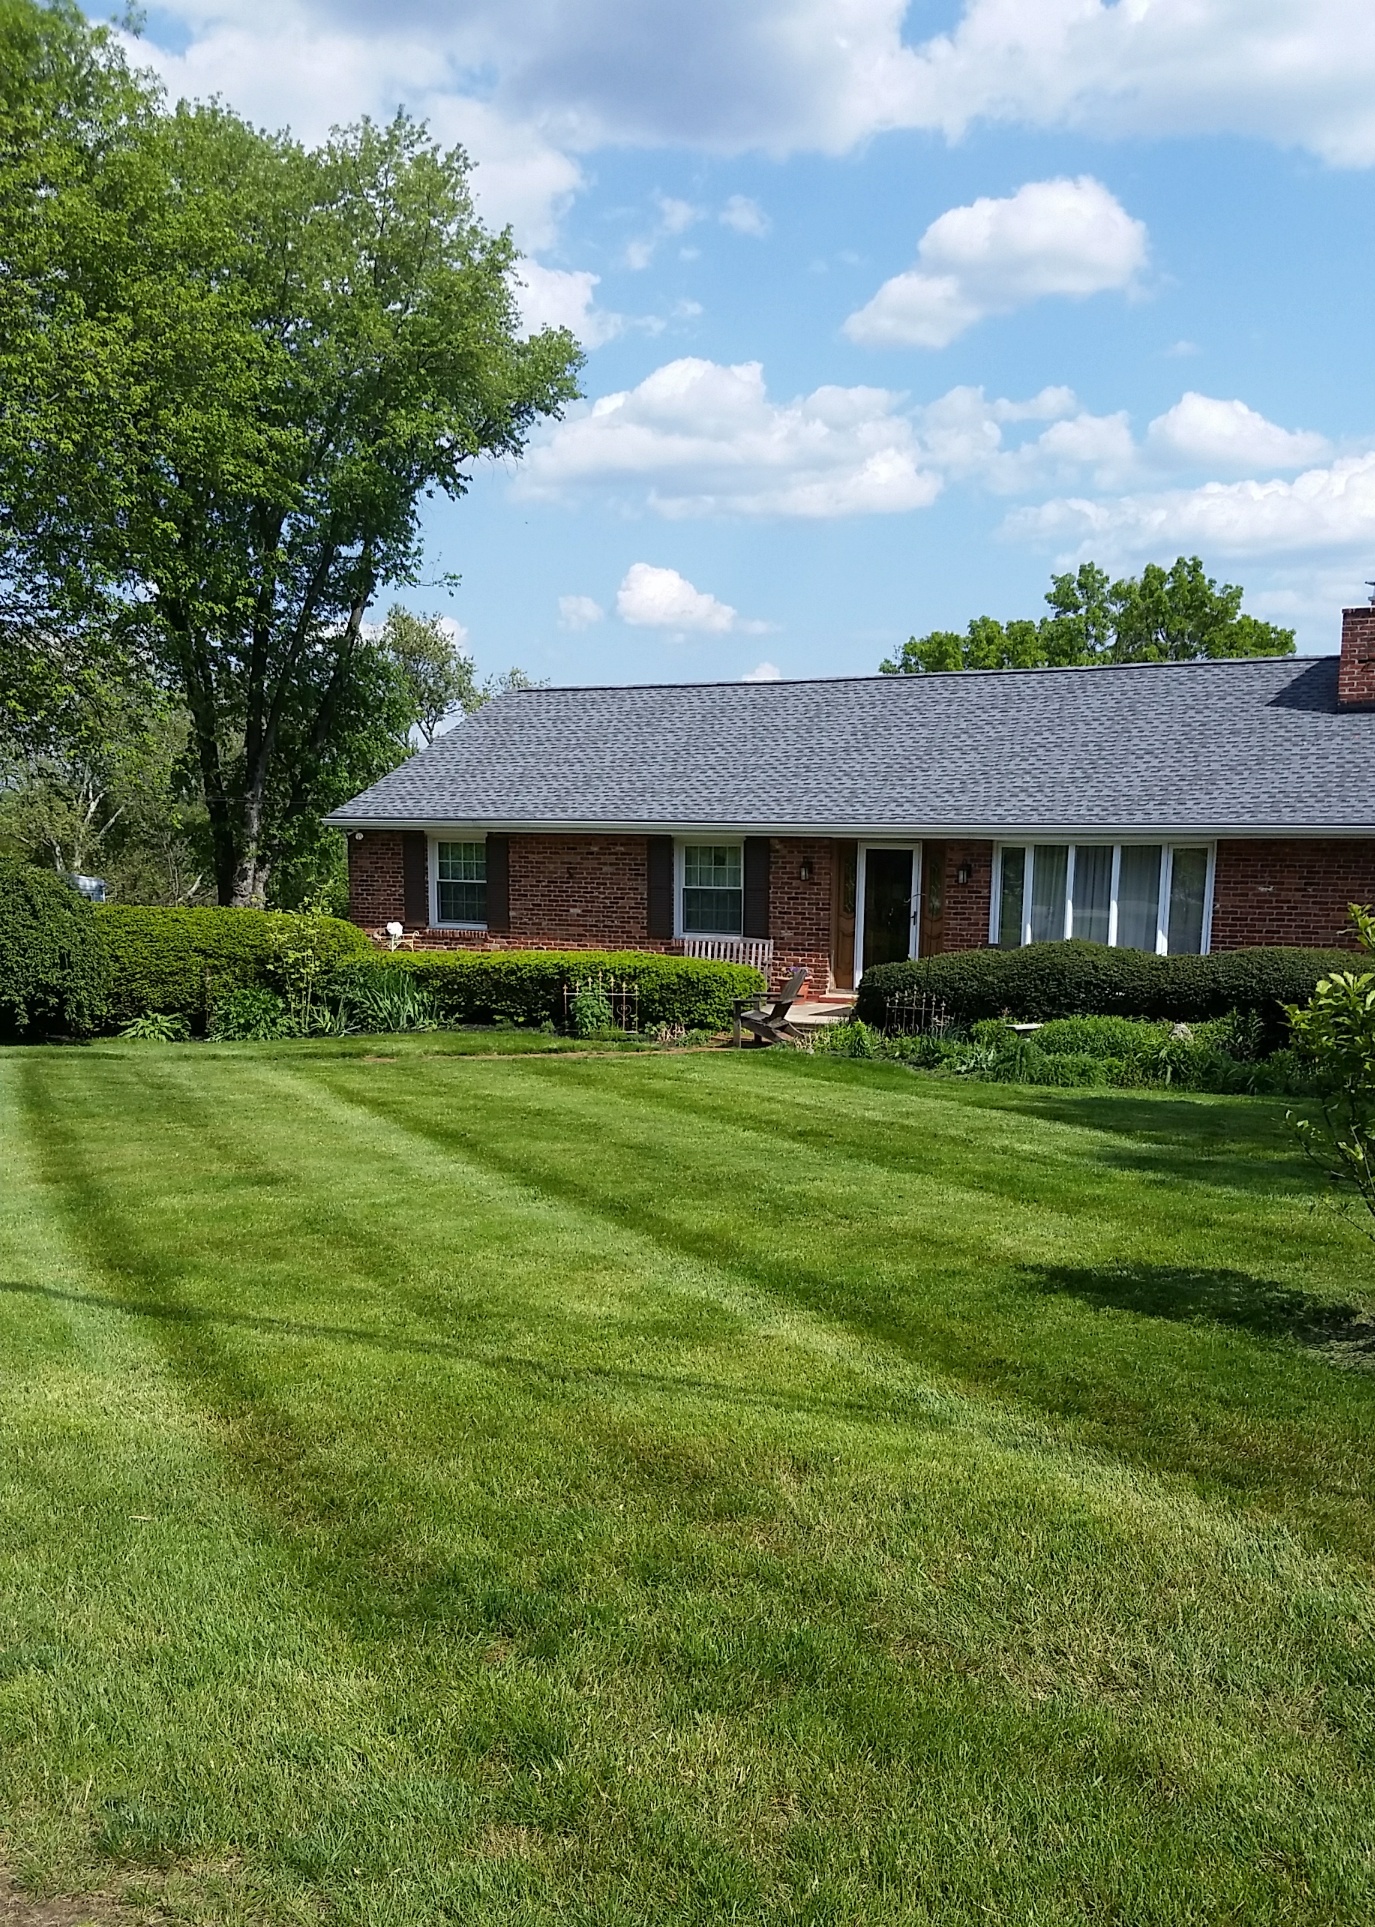 West Chester Lawn Care